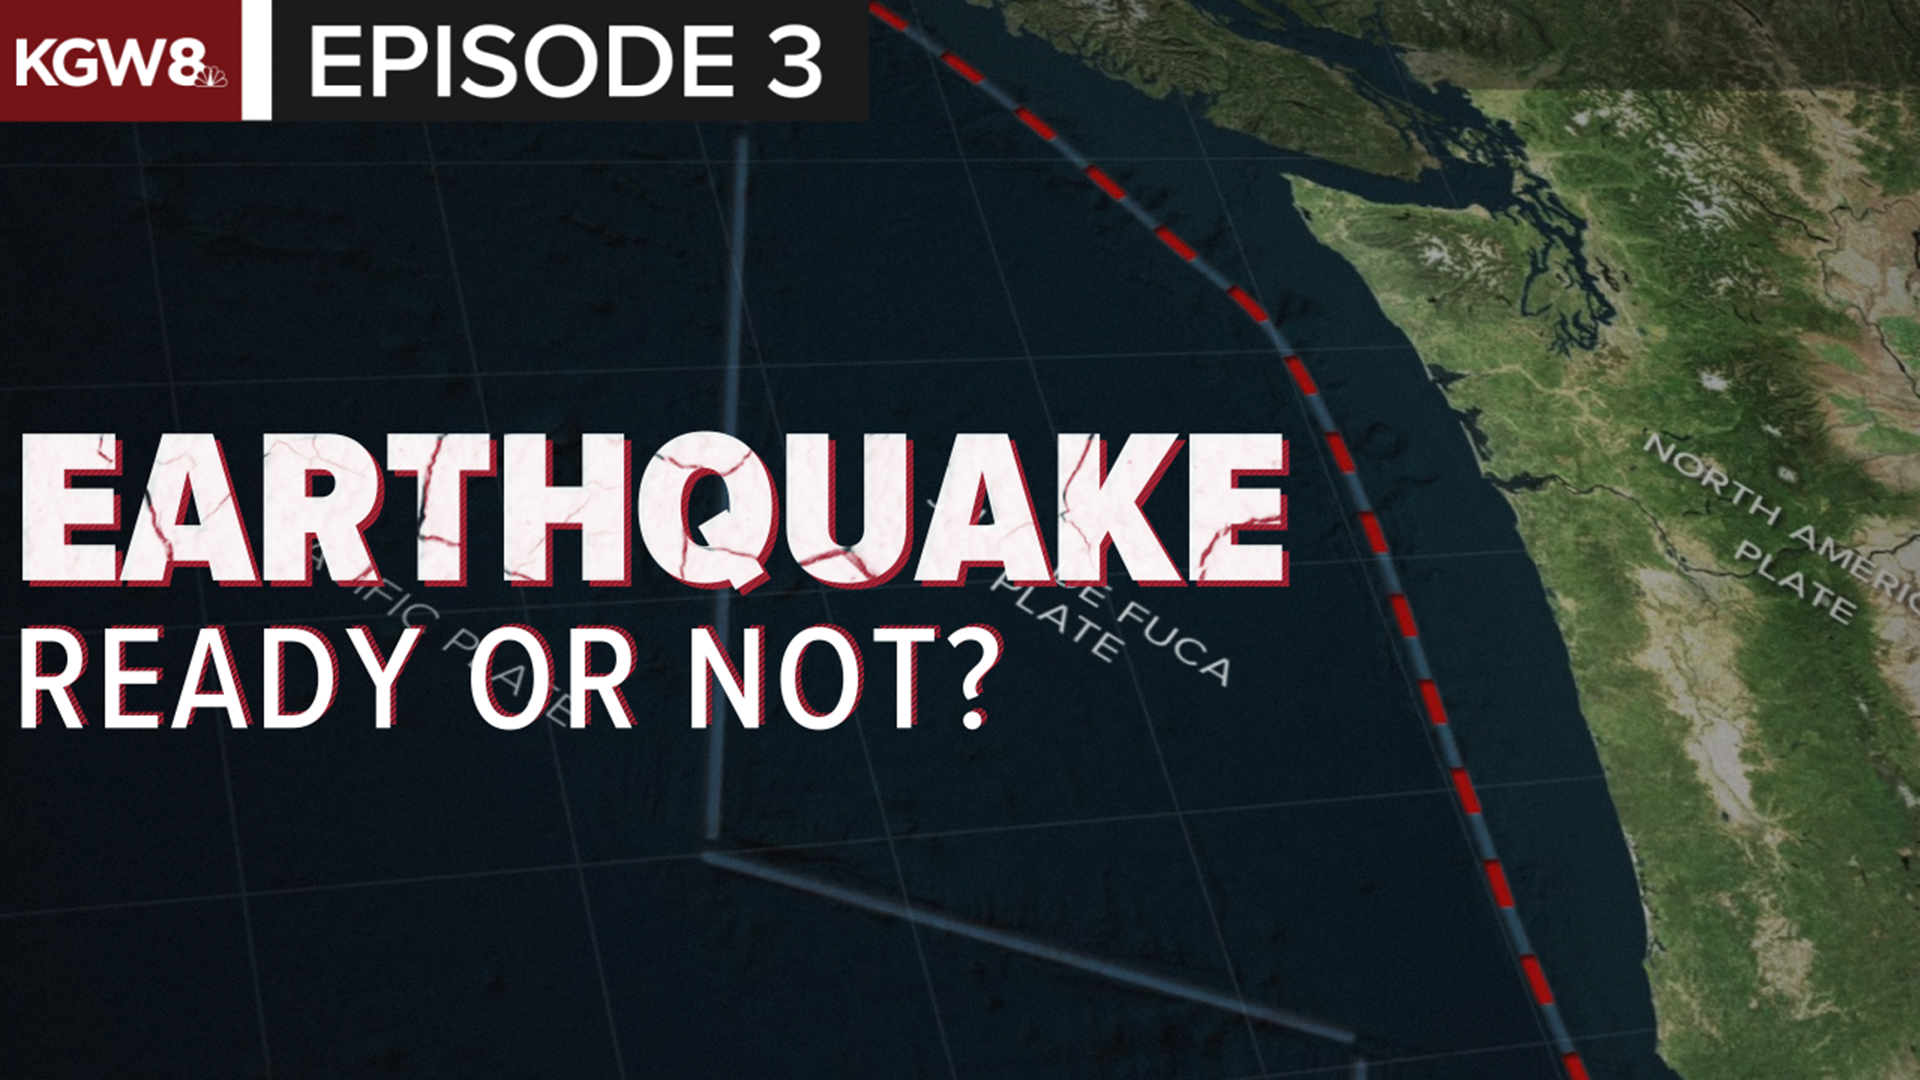 The Cascadia Subduction Zone is a 620-mile-long fault that stretches from British Columbia to Northern California, and pressure along the fault is building daily.